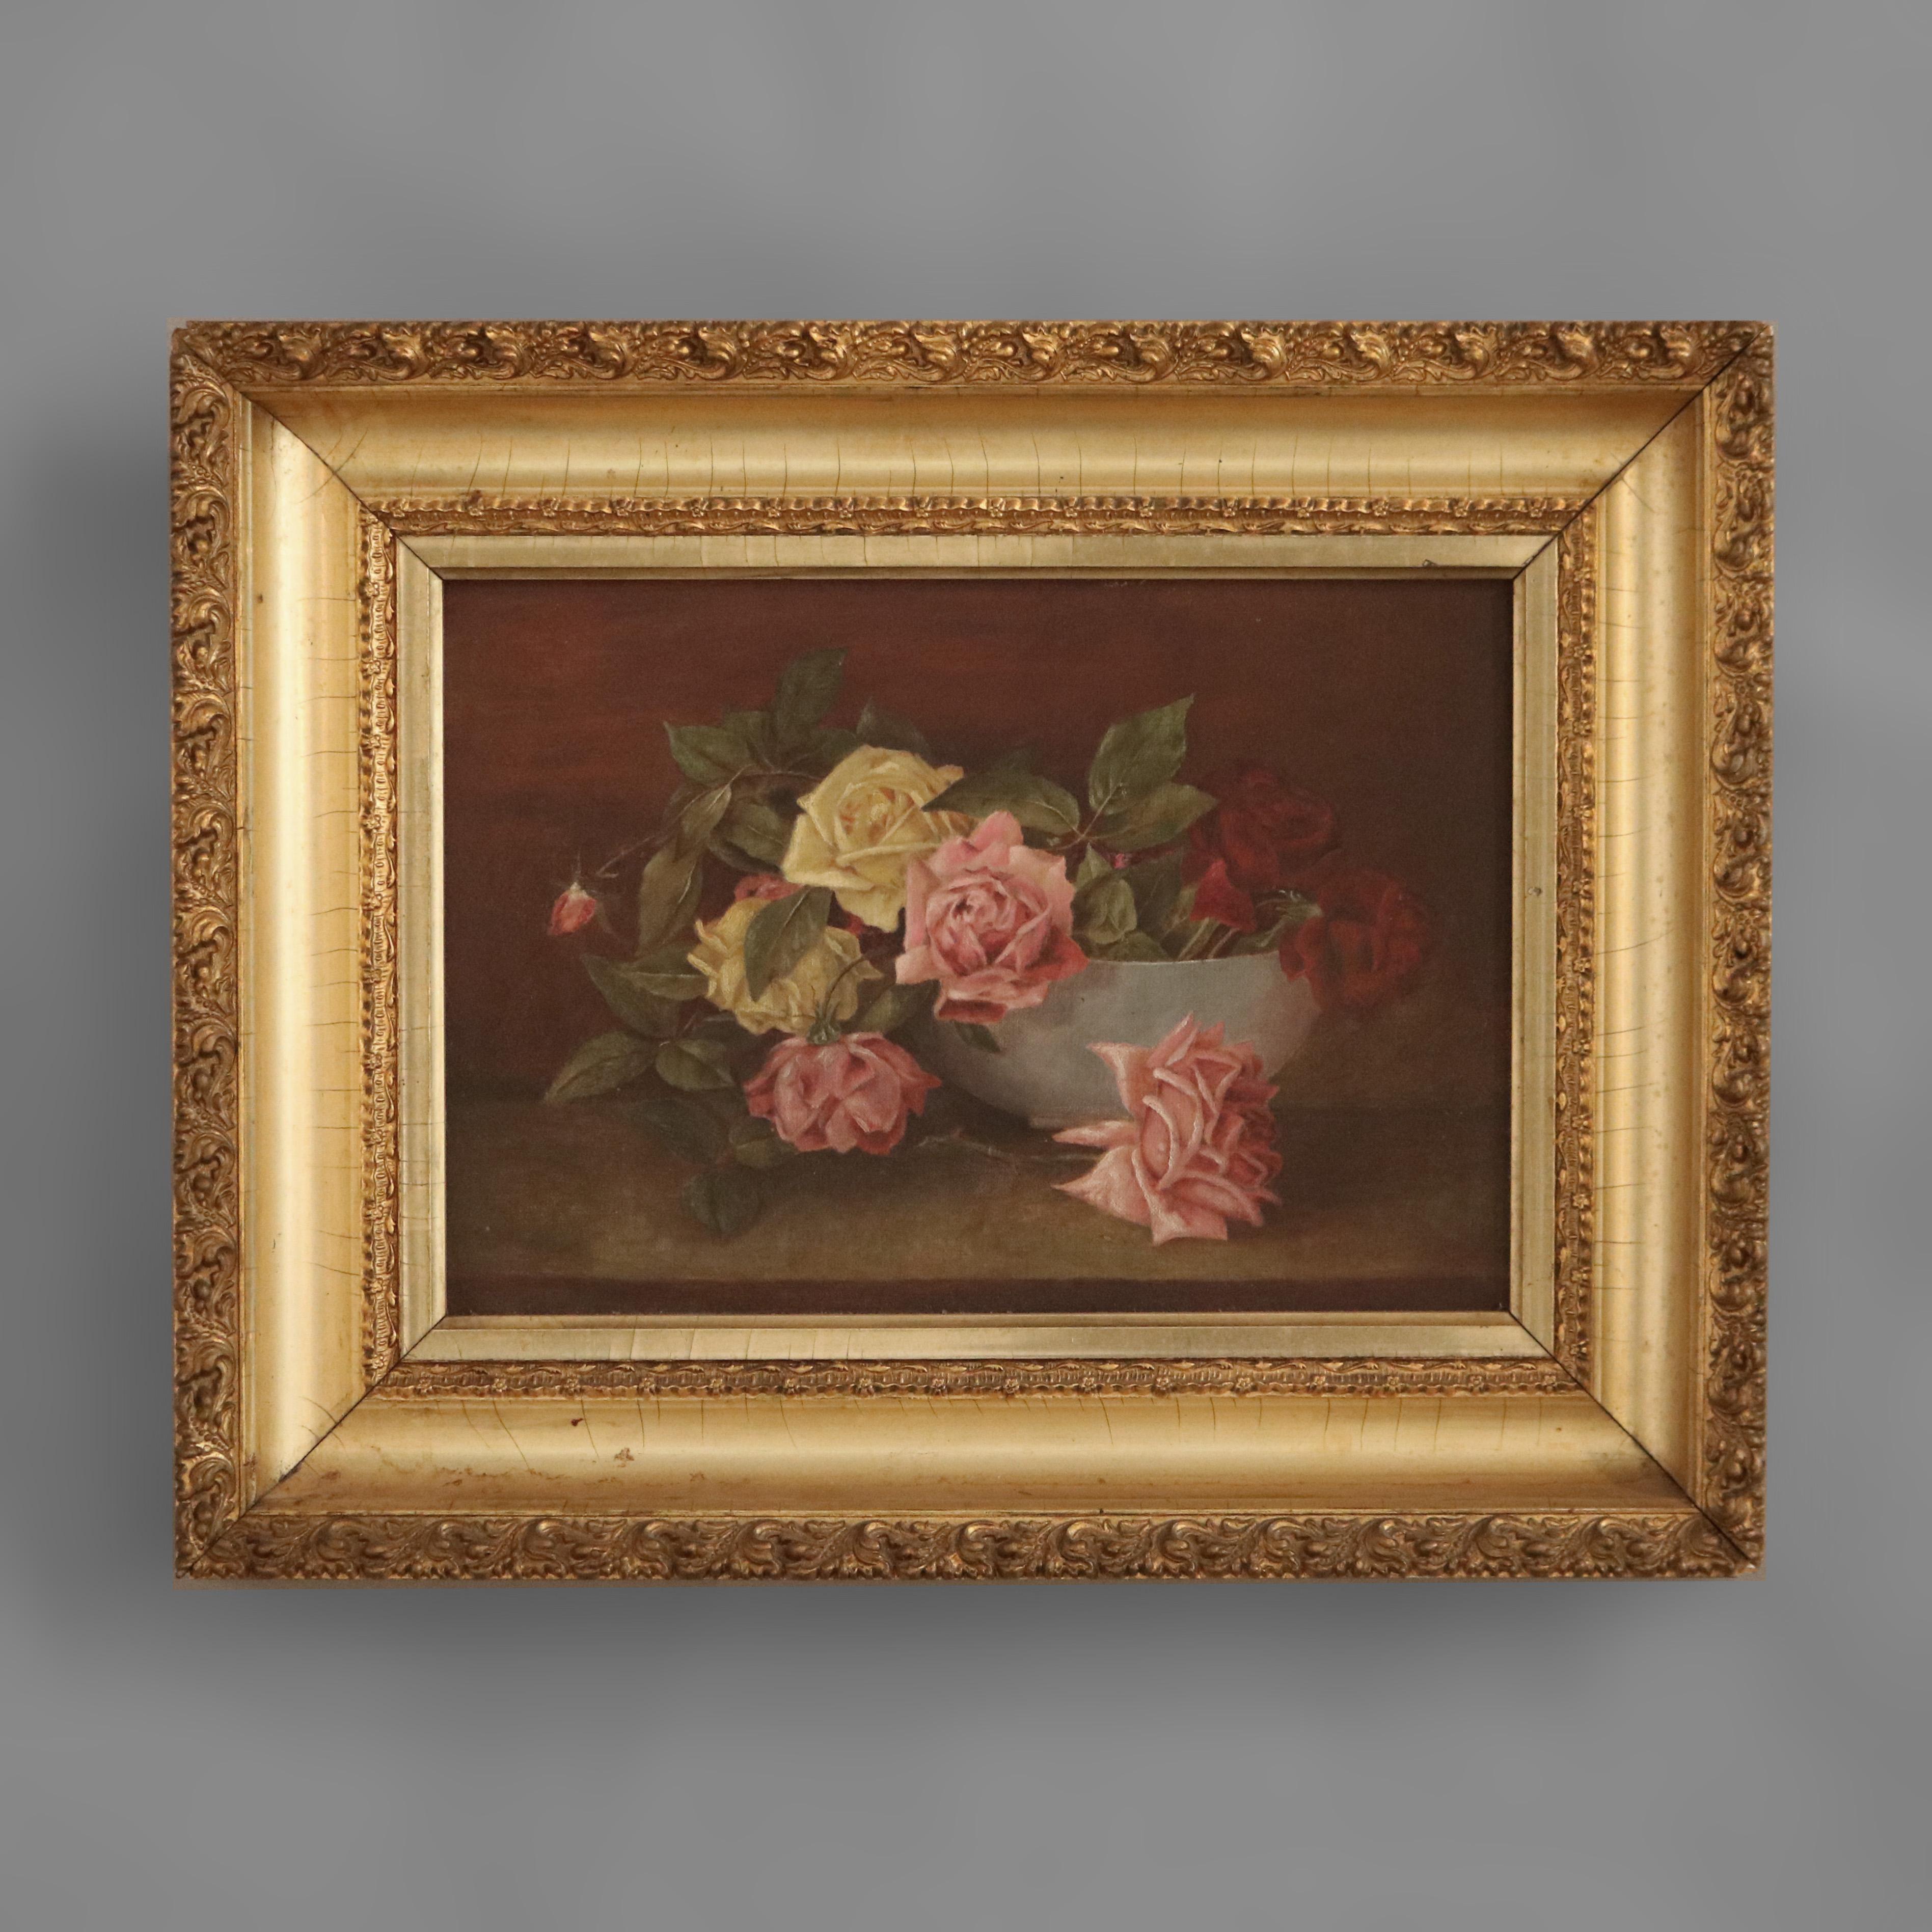 Hand-Painted Antique Floral Still Life Painting of Roses in Giltwood Frame, circa 1890